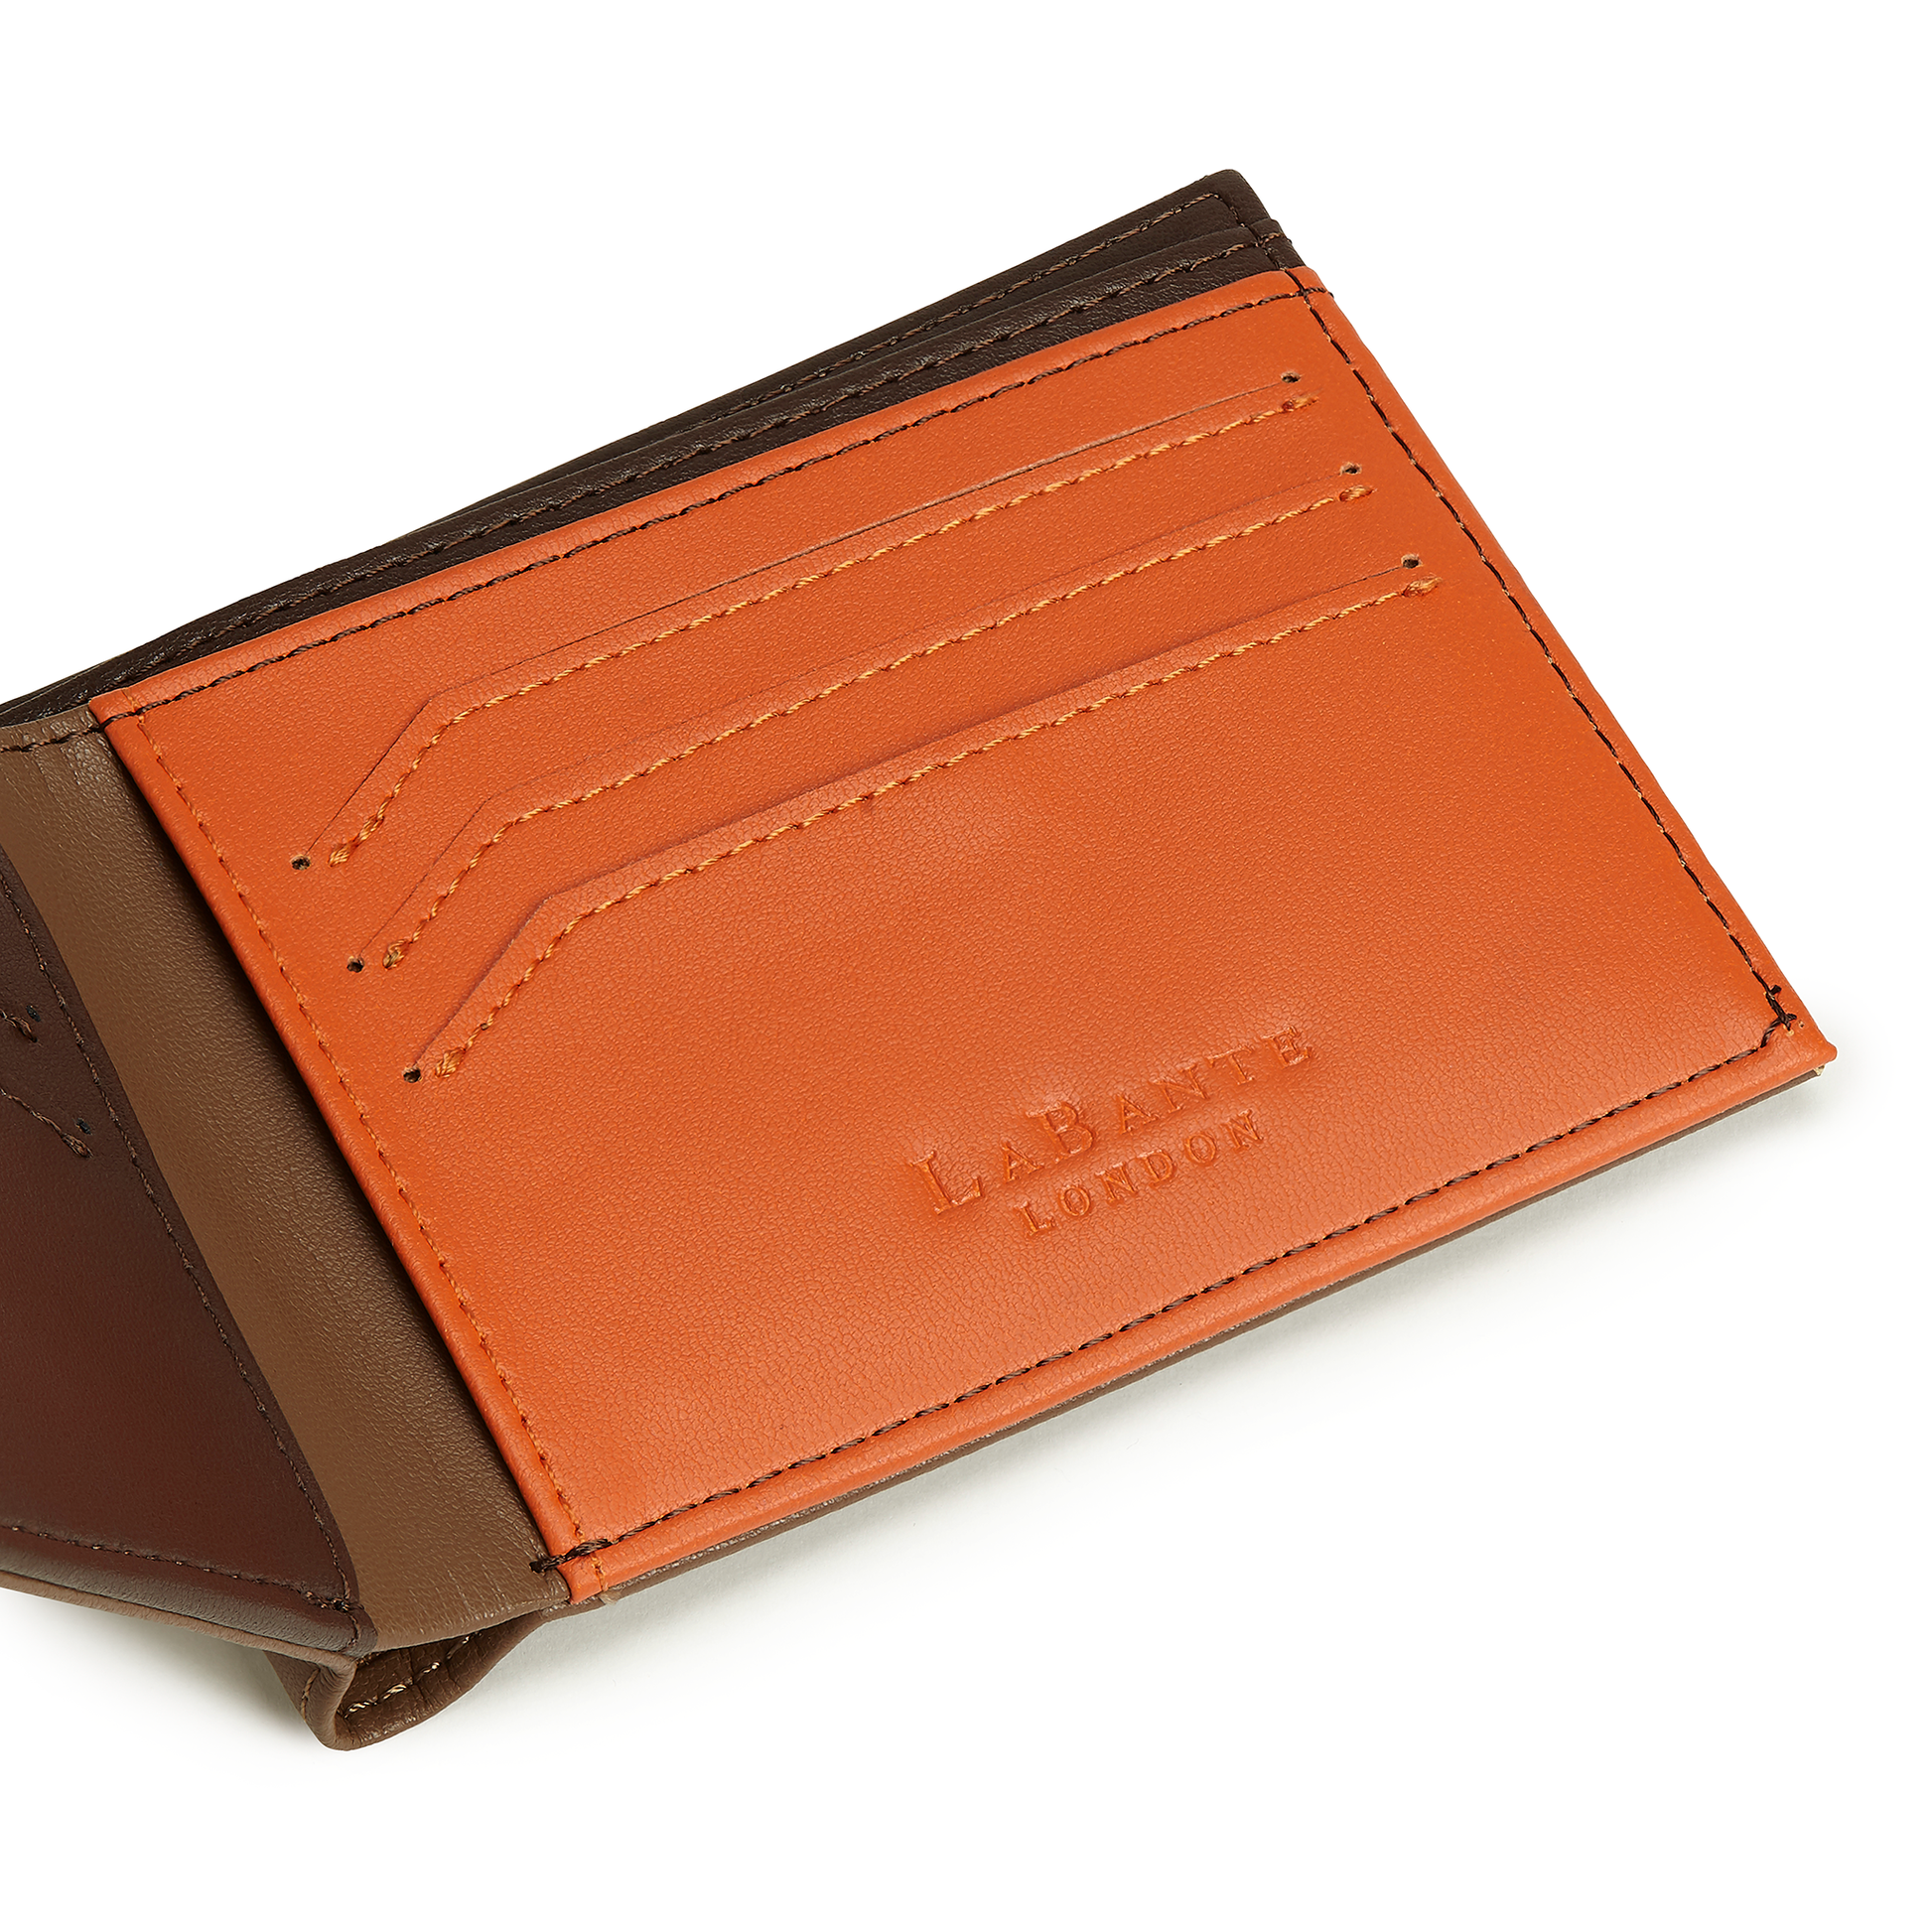 A Brown - Brave Vegan Bifold Wallet opened to reveal an orange interior with multiple card slots embossed with "Jade Azolla.